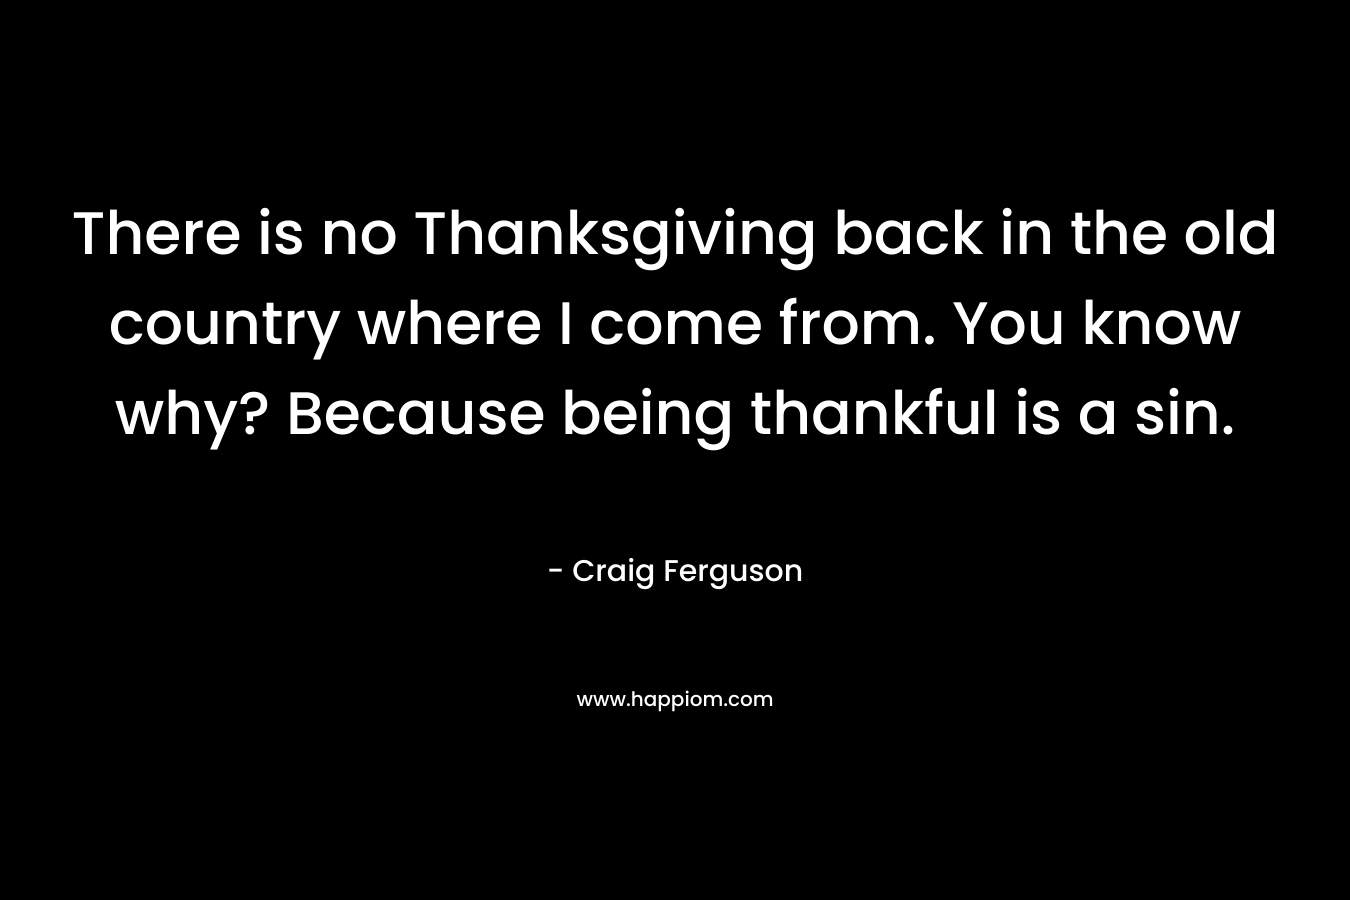 There is no Thanksgiving back in the old country where I come from. You know why? Because being thankful is a sin. – Craig Ferguson